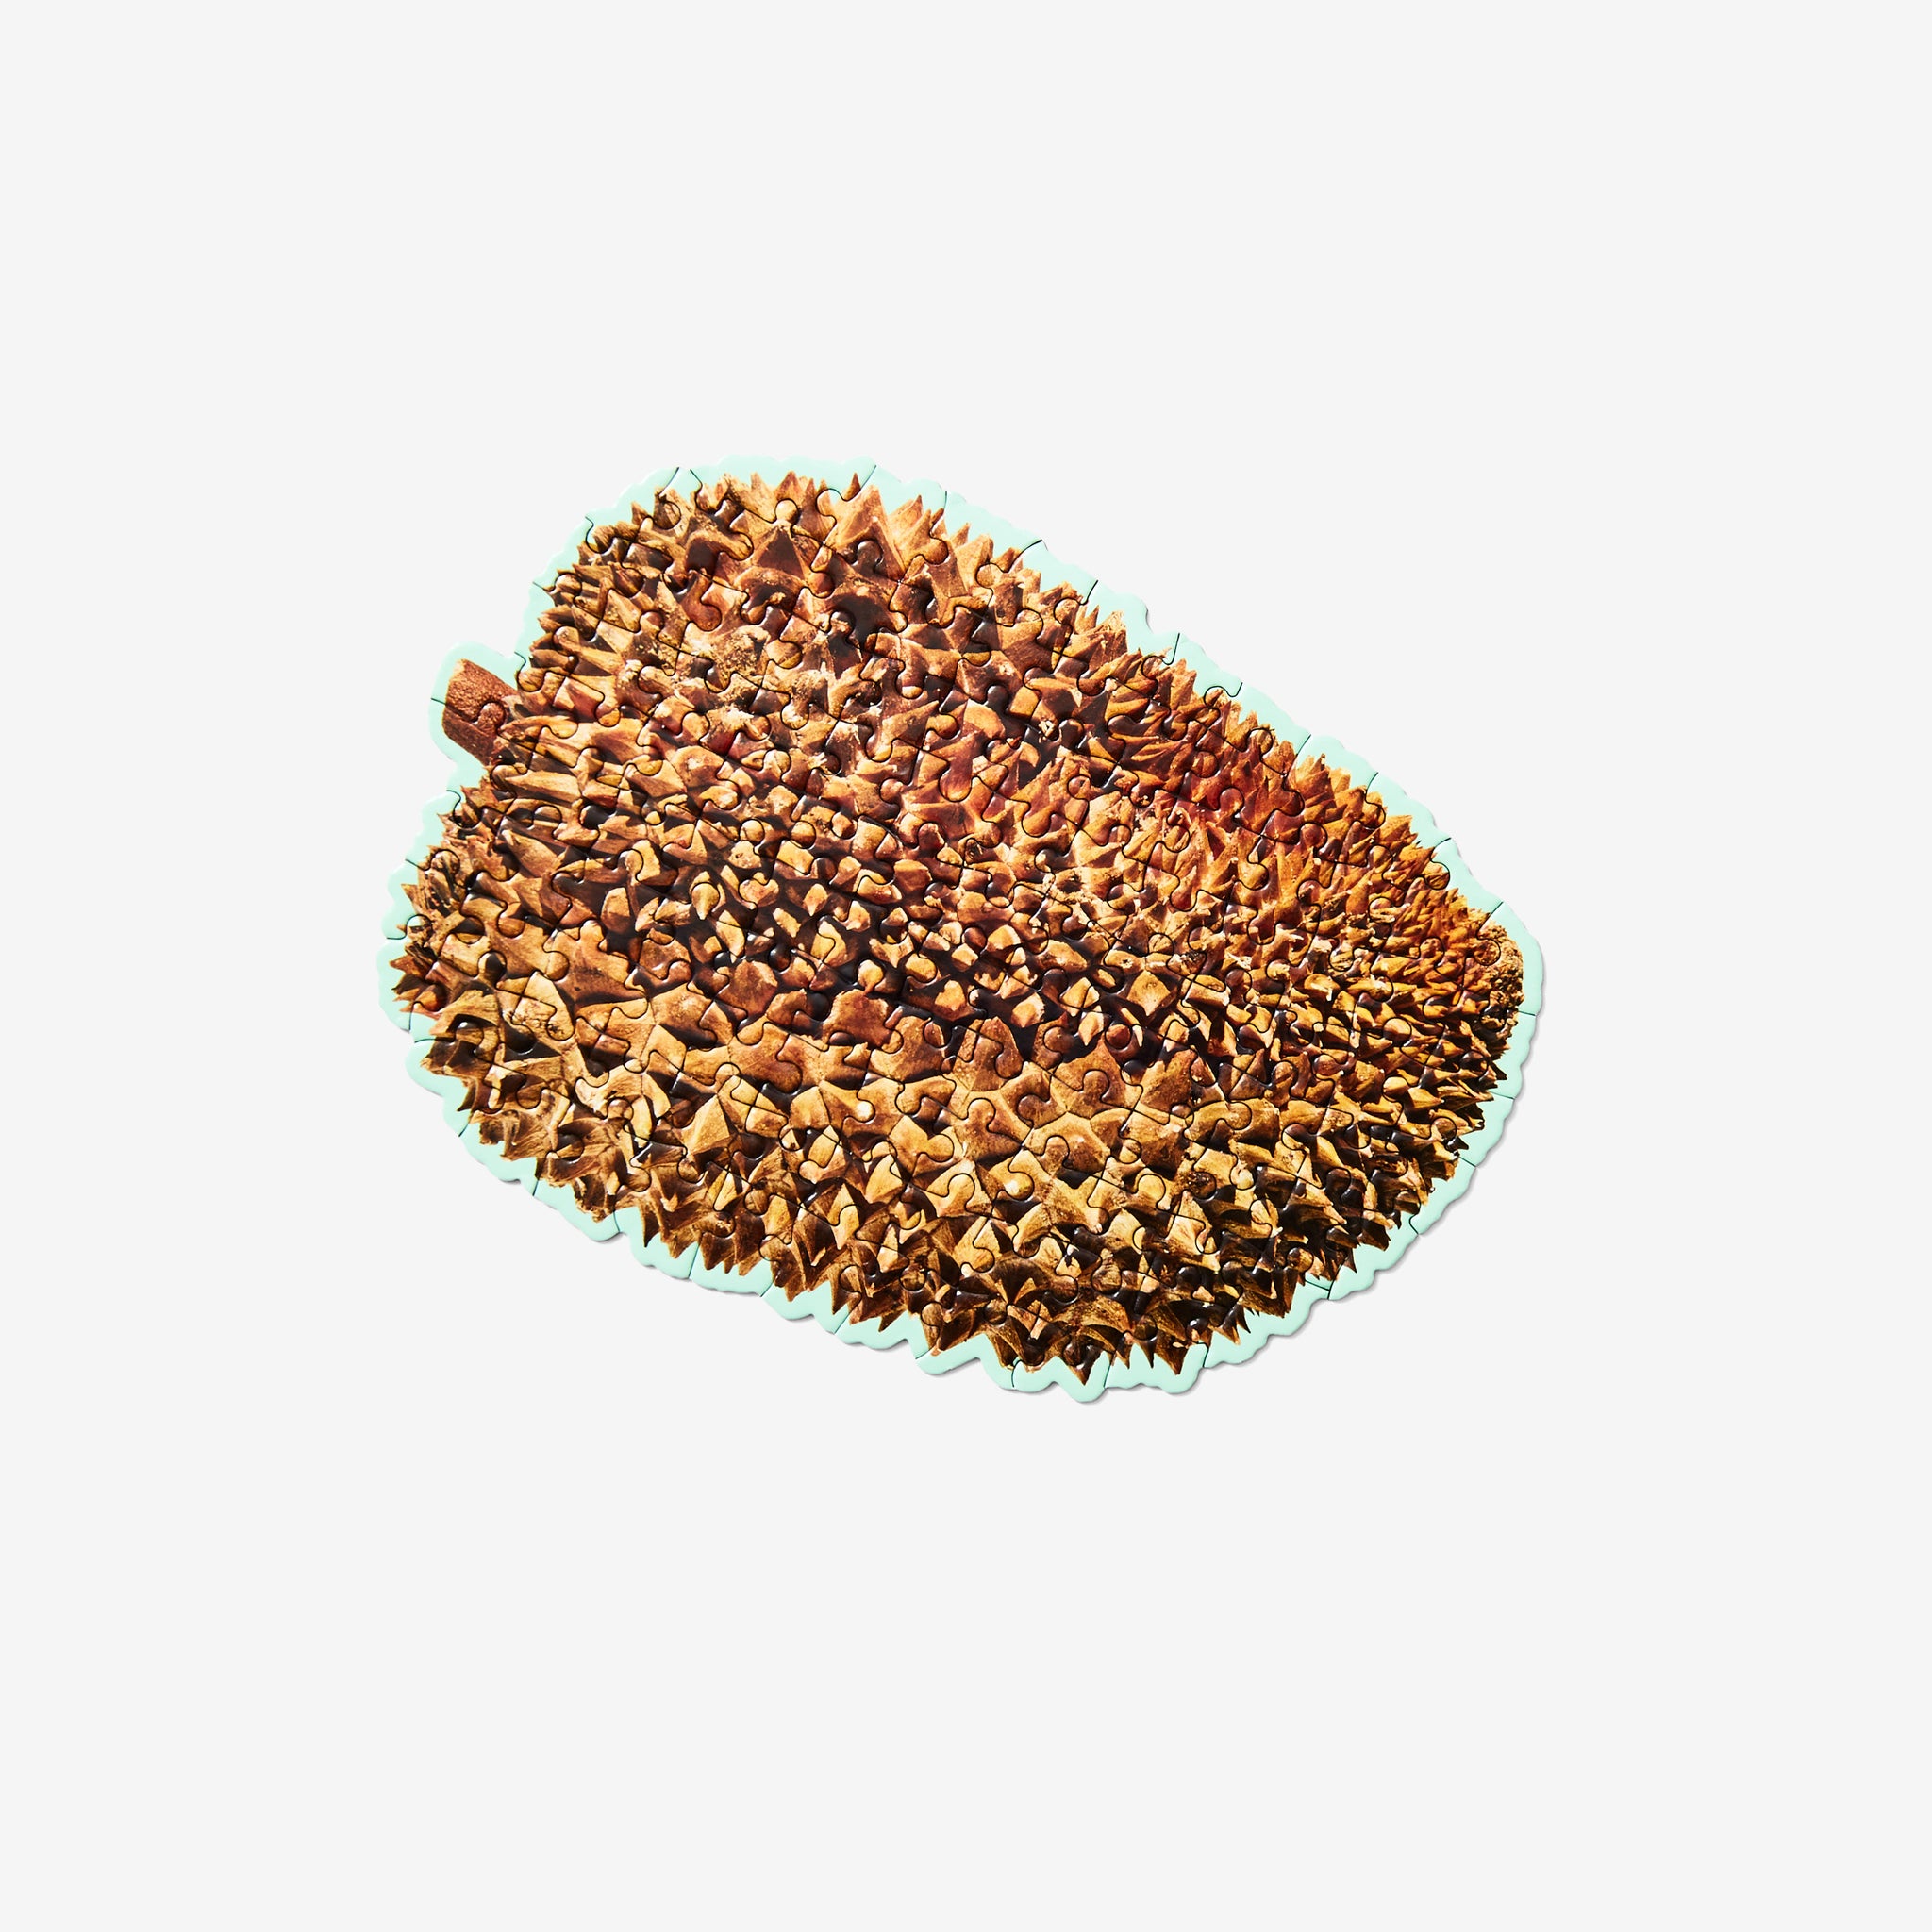 little puzzle thing® - Durian